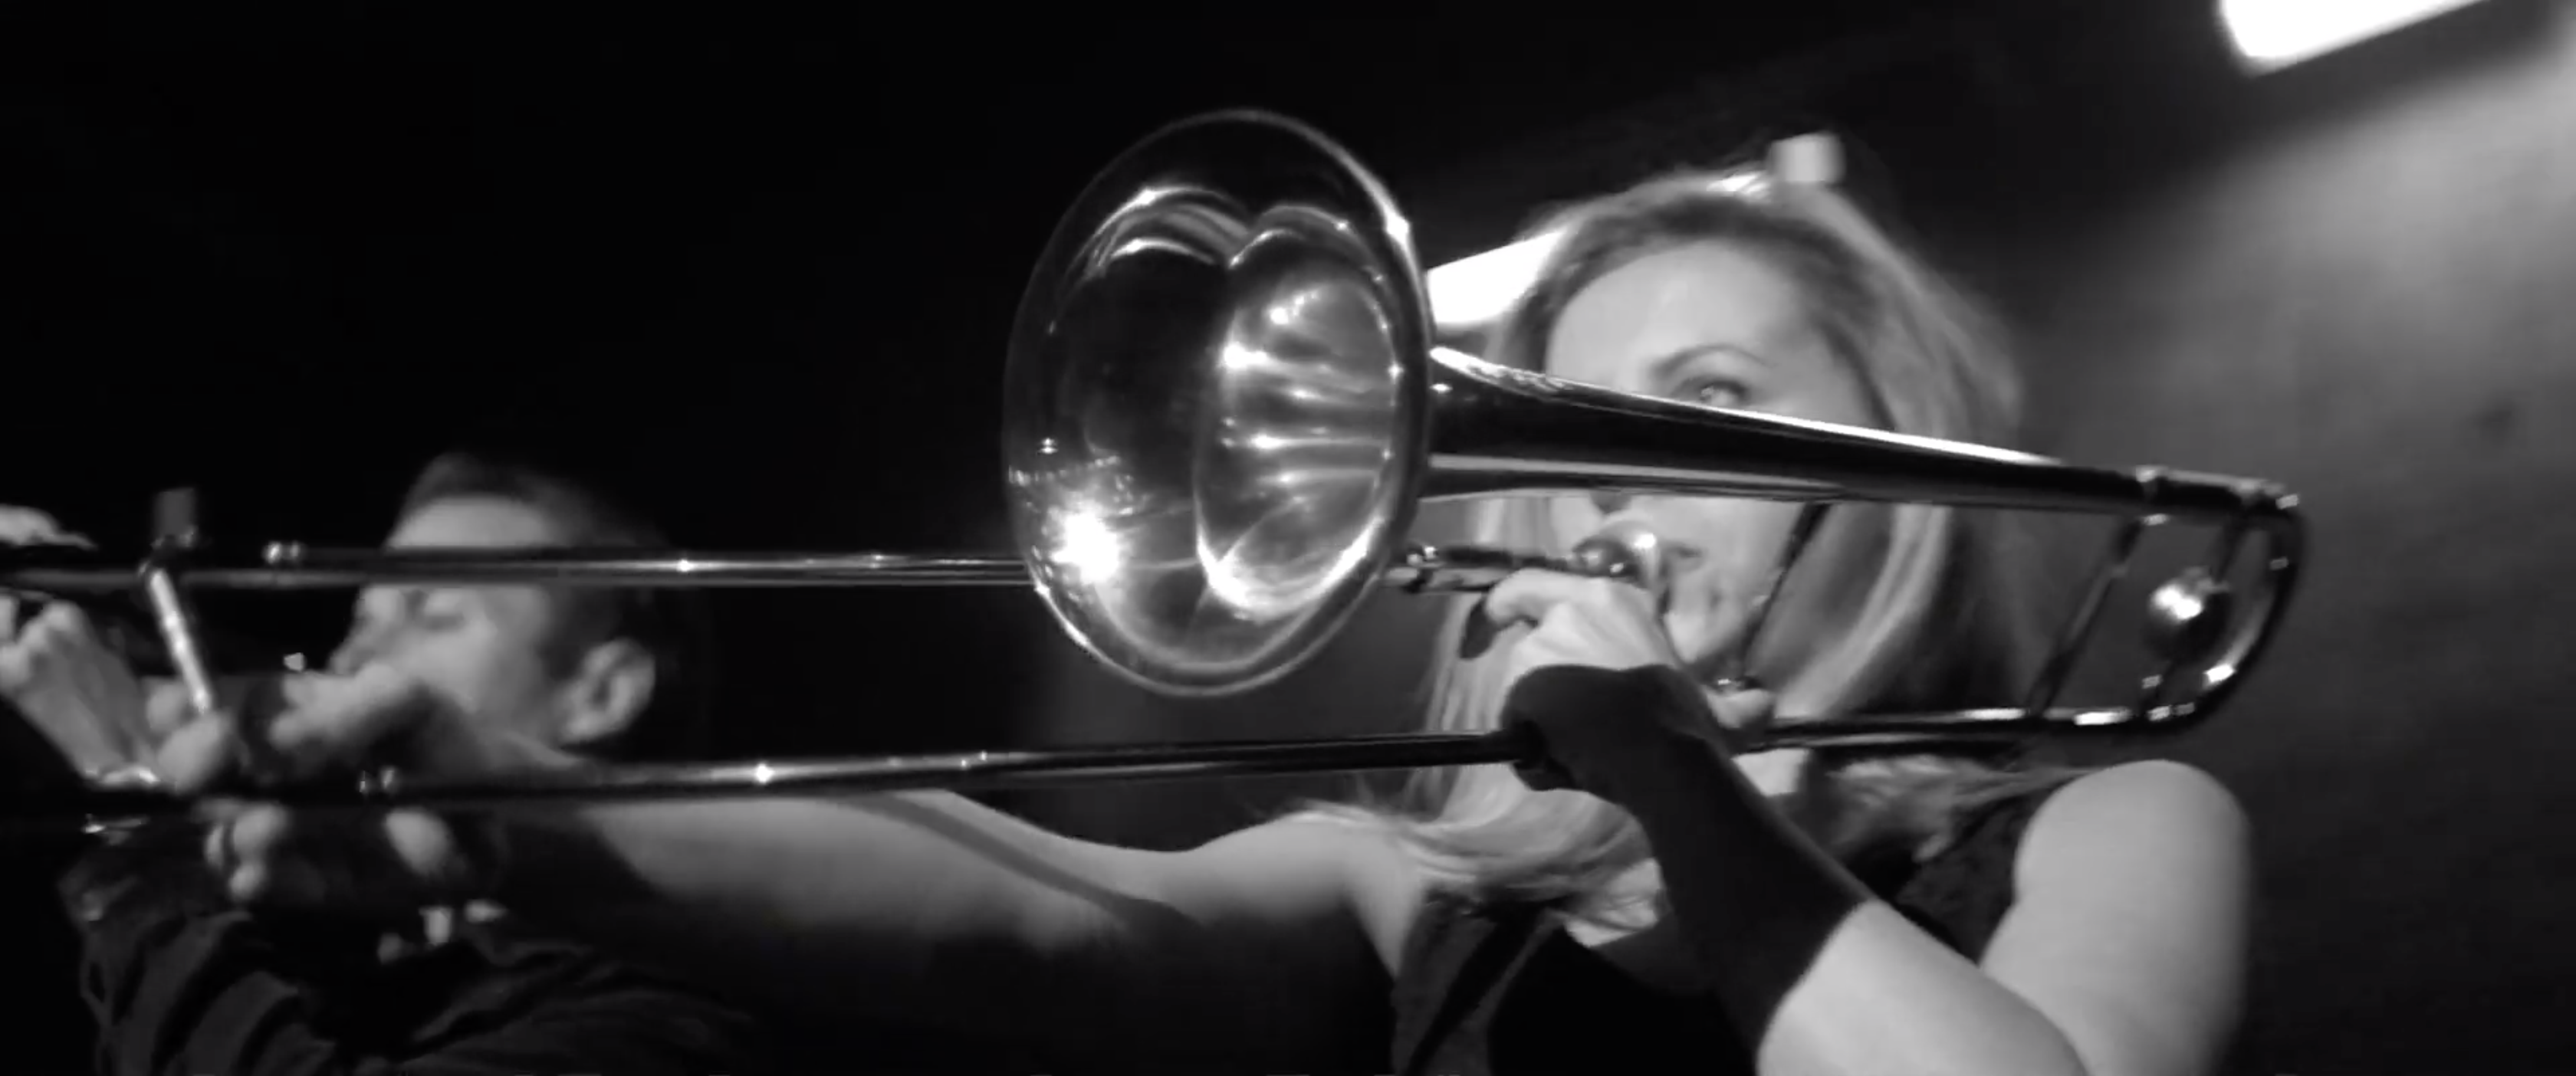 Still from the music video for Maarten Heijmans & Band - Sammy. It's a close-up of the trombone player.